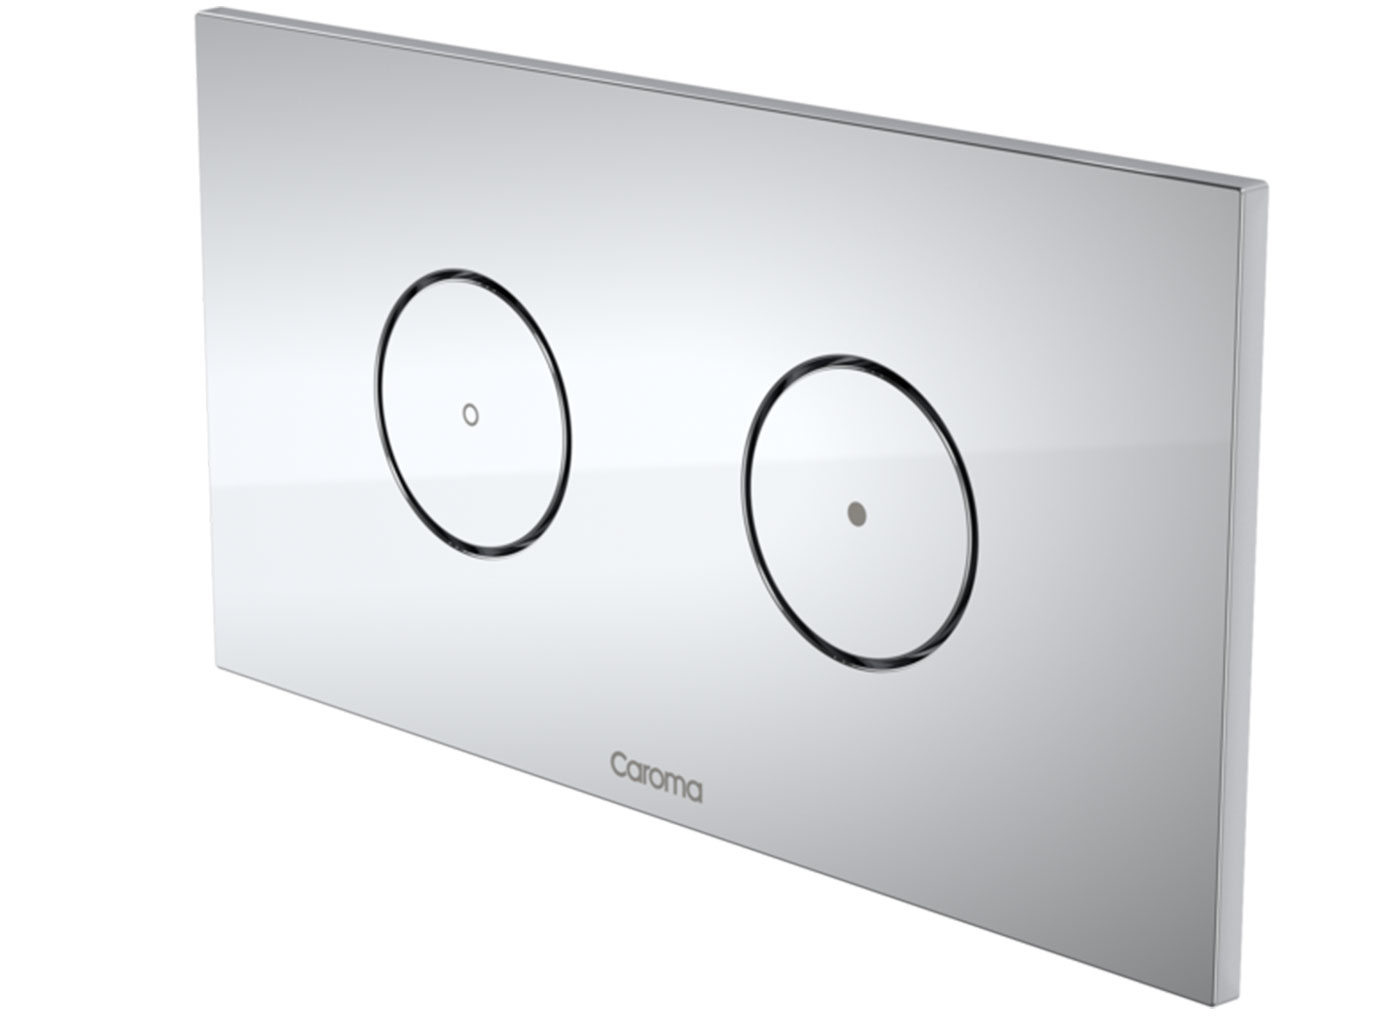 Choose the buttons that push your buttons. Invisi Series II® offer an extensive range of button styles which can be matched with any pan to suit the look of your bathroom. They can be installed on the wall above the toilet